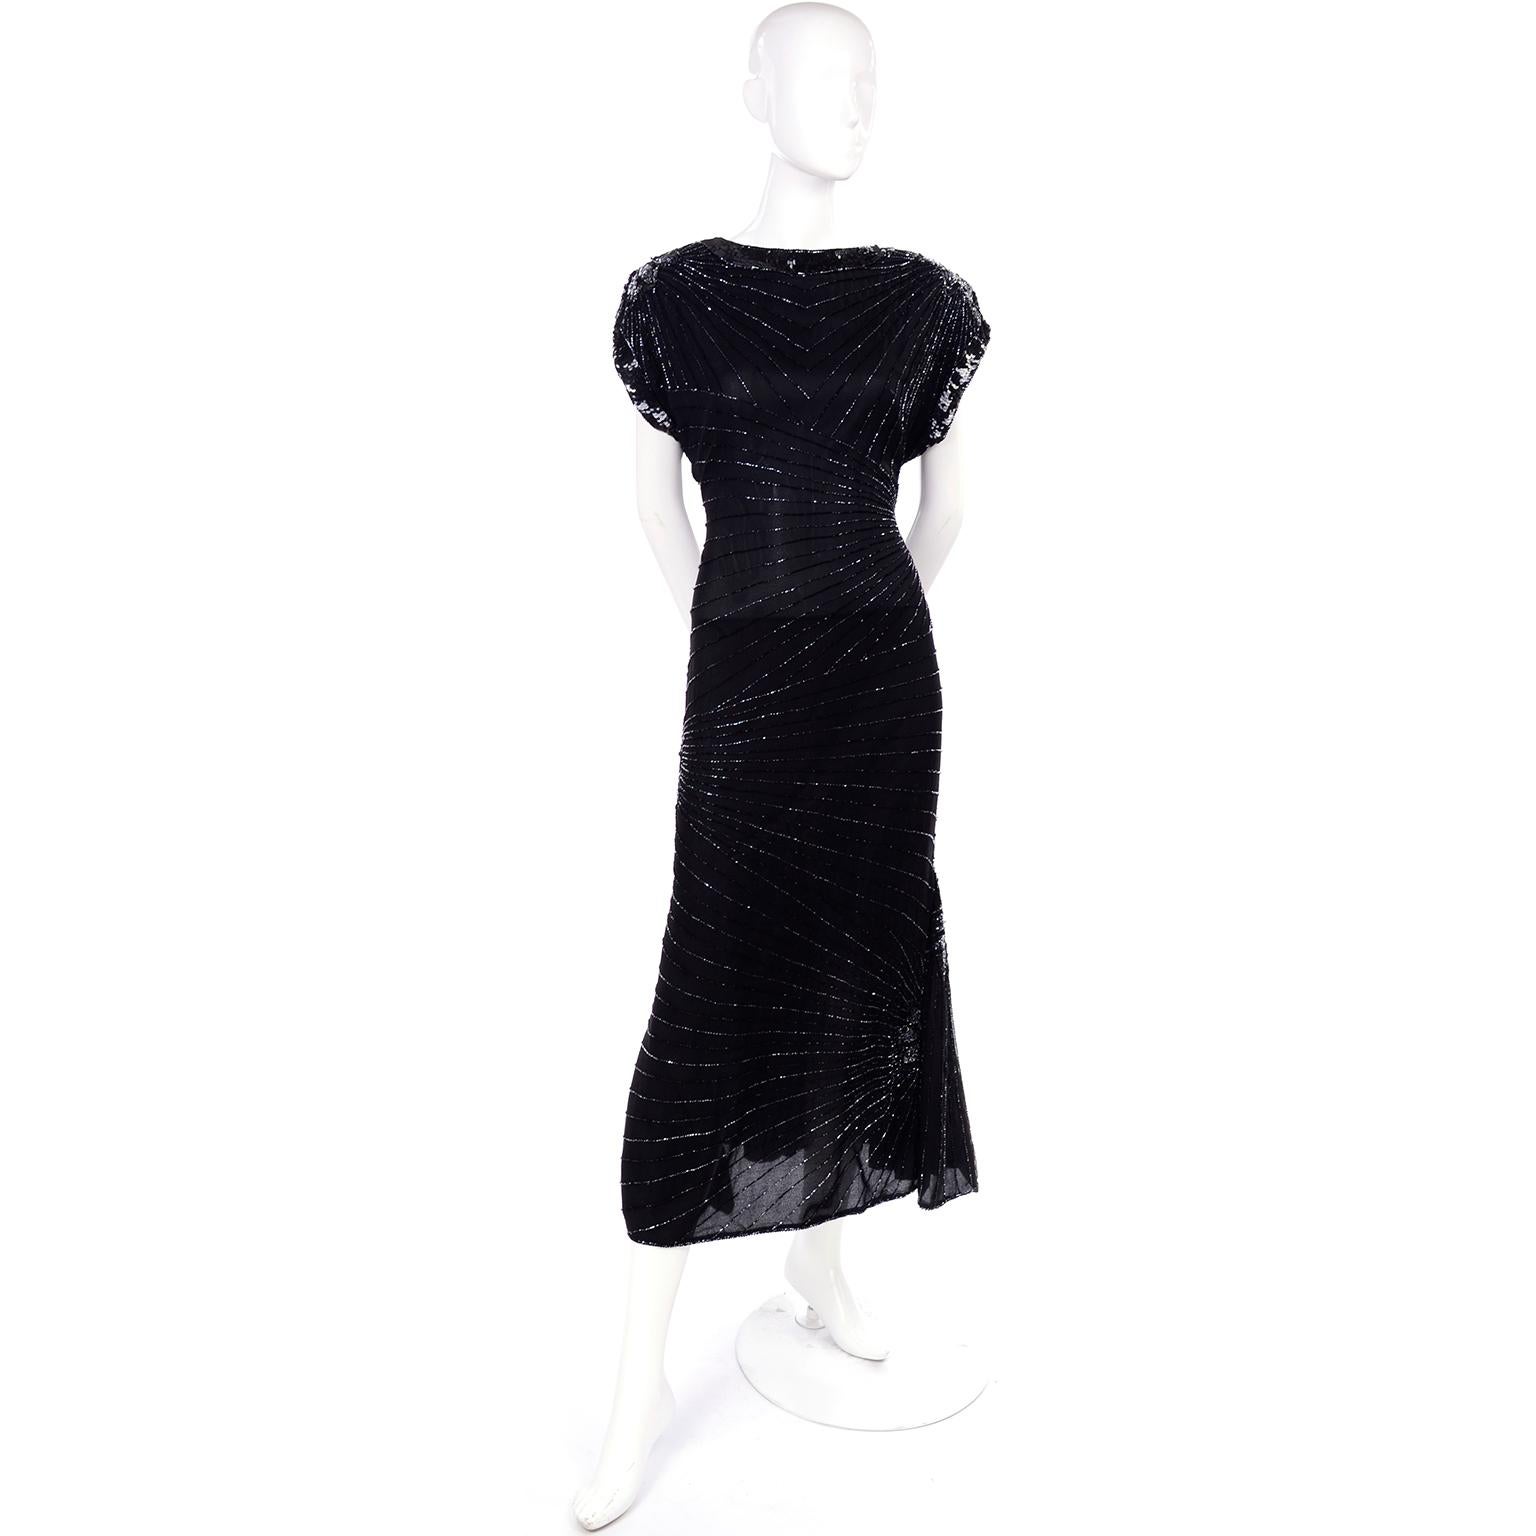 This is a sensational vintage 100% silk black dress, lined in rayon, from the 1980's. The 1920s/30s style 80's dress zips up the back with an exaggerated keyhole opening, and a hook and eye at the neck. There is lovely sequin trim and we love the